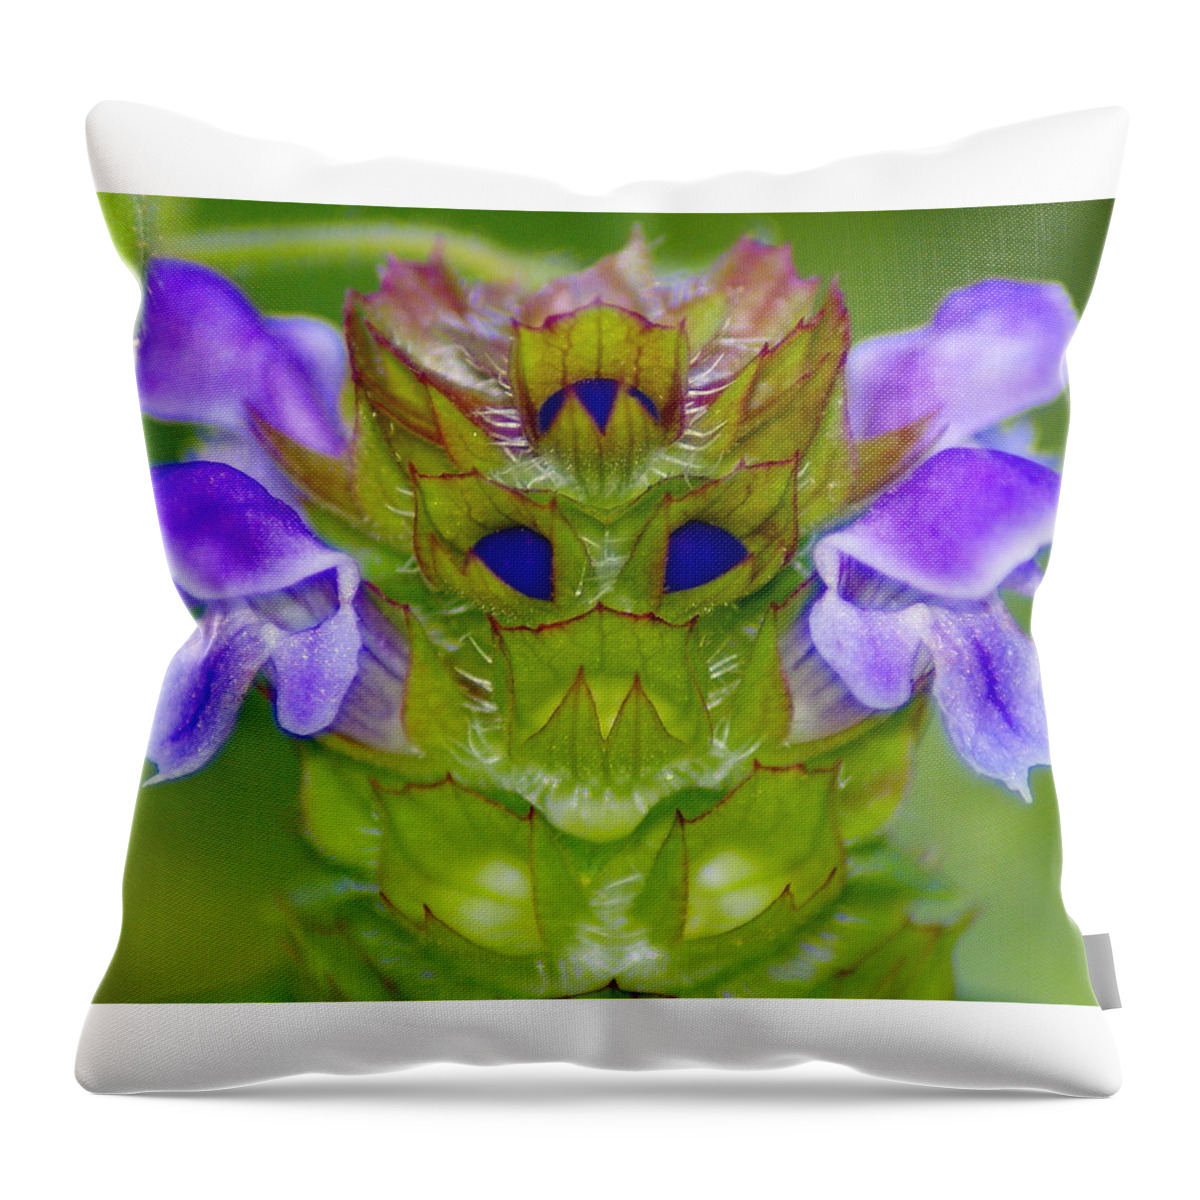 Flowers Throw Pillow featuring the photograph A Tiny Flower King by Ben Upham III